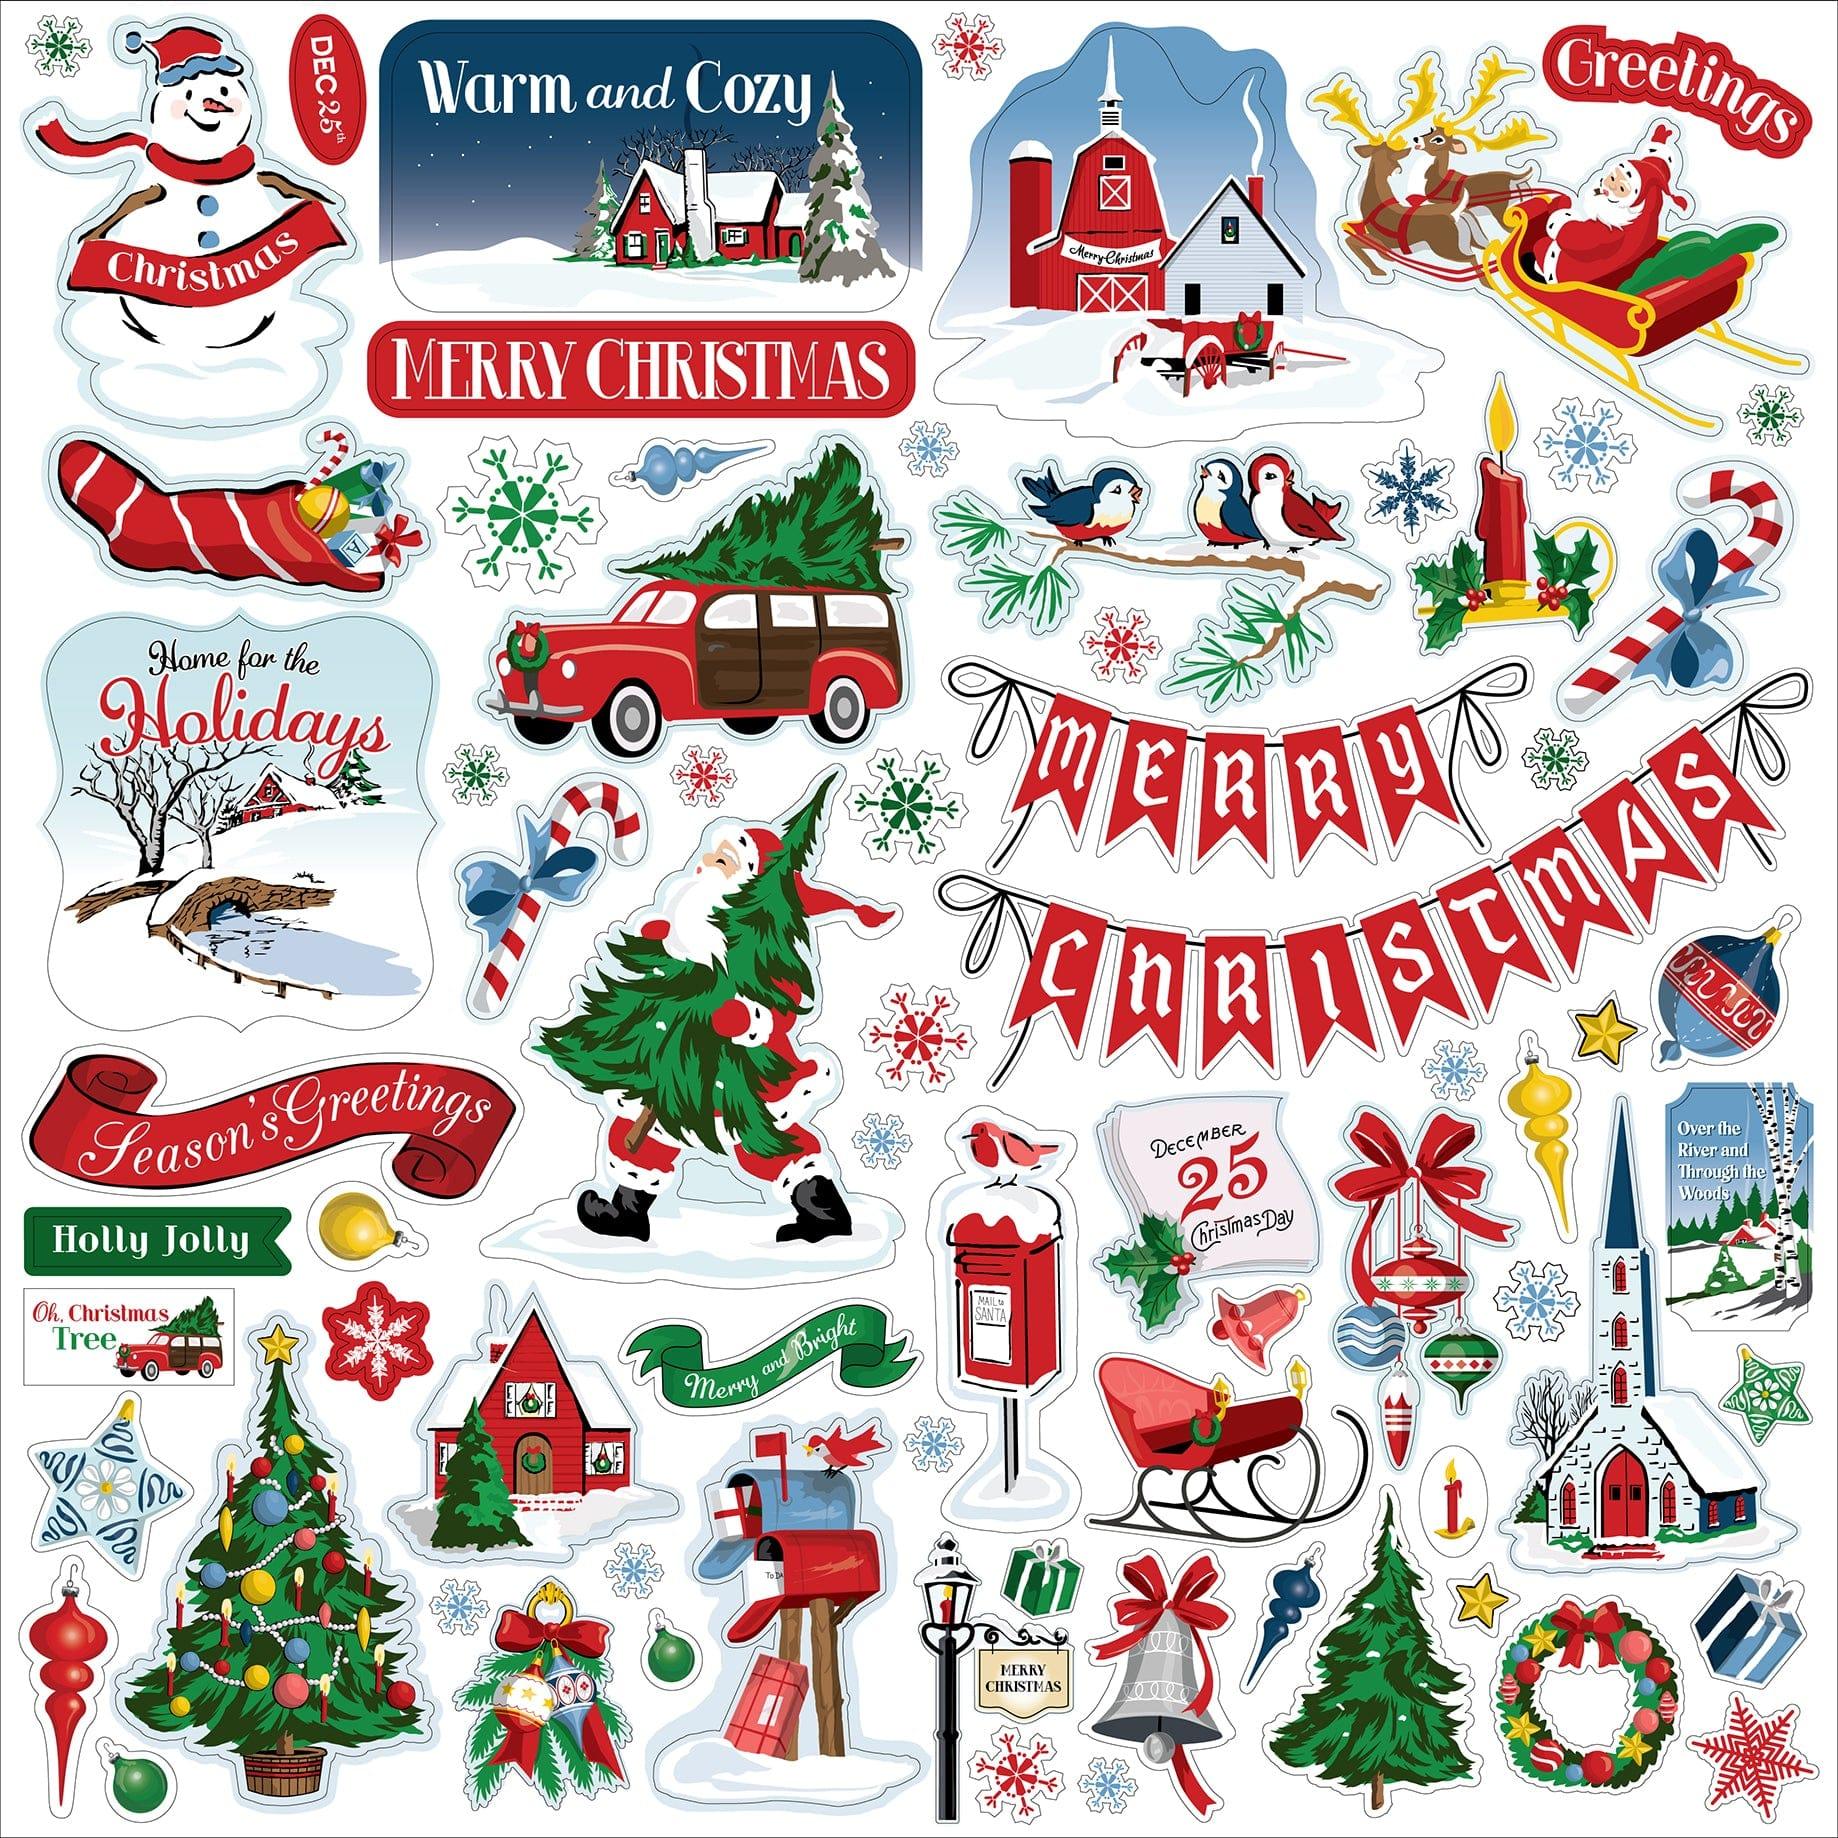 White Christmas Collection 12 x 12 Scrapbook Paper & Sticker Pack by Carta Bella - Scrapbook Supply Companies